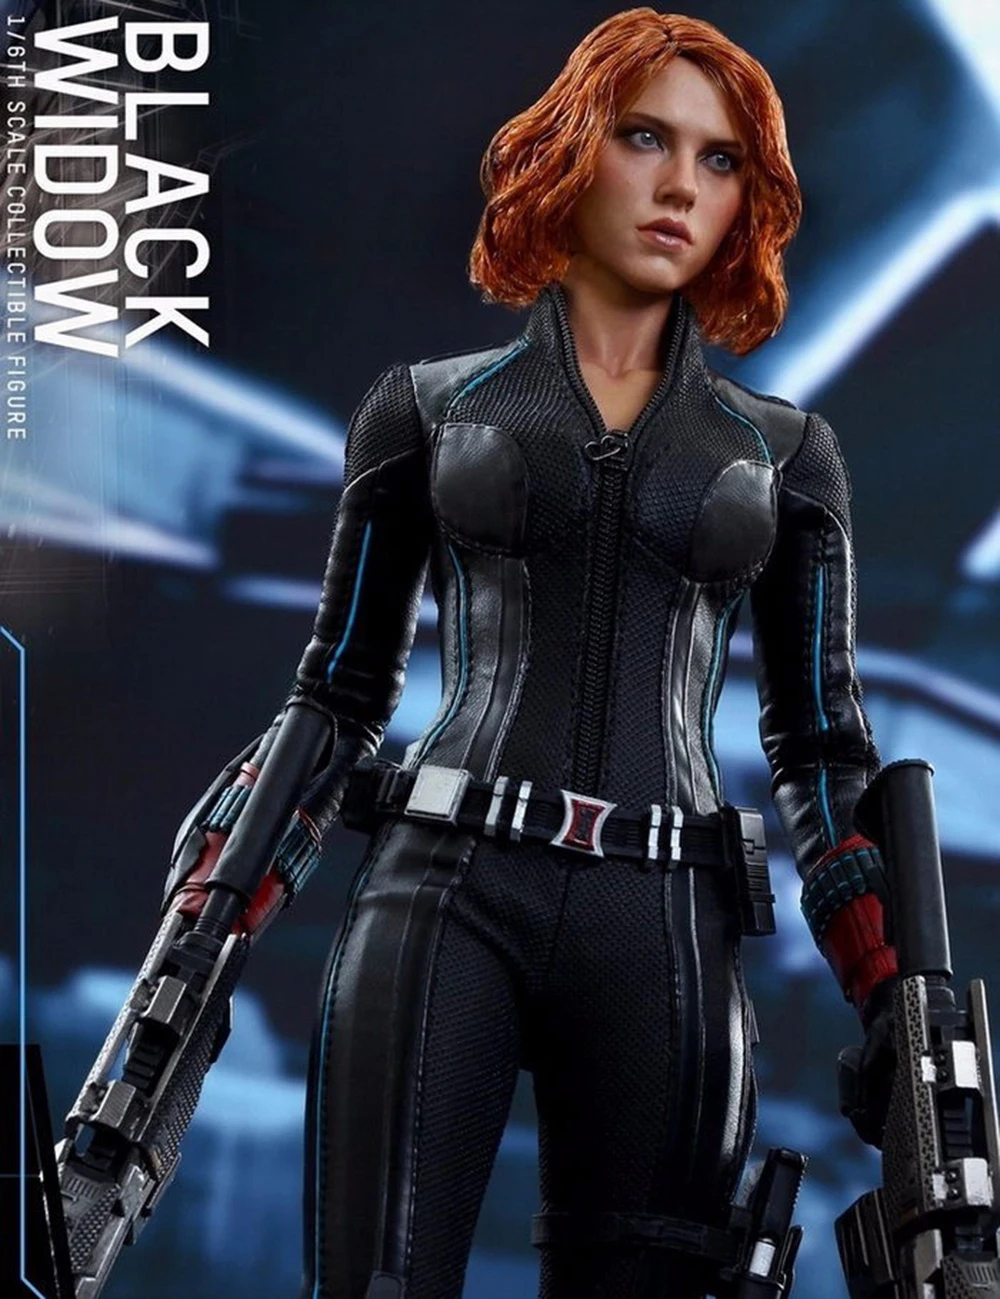 

MMS288 1/6 Black Widow 4.0 Action Figure Captain America Avengers Age of Ultron HT Collection Figure Models